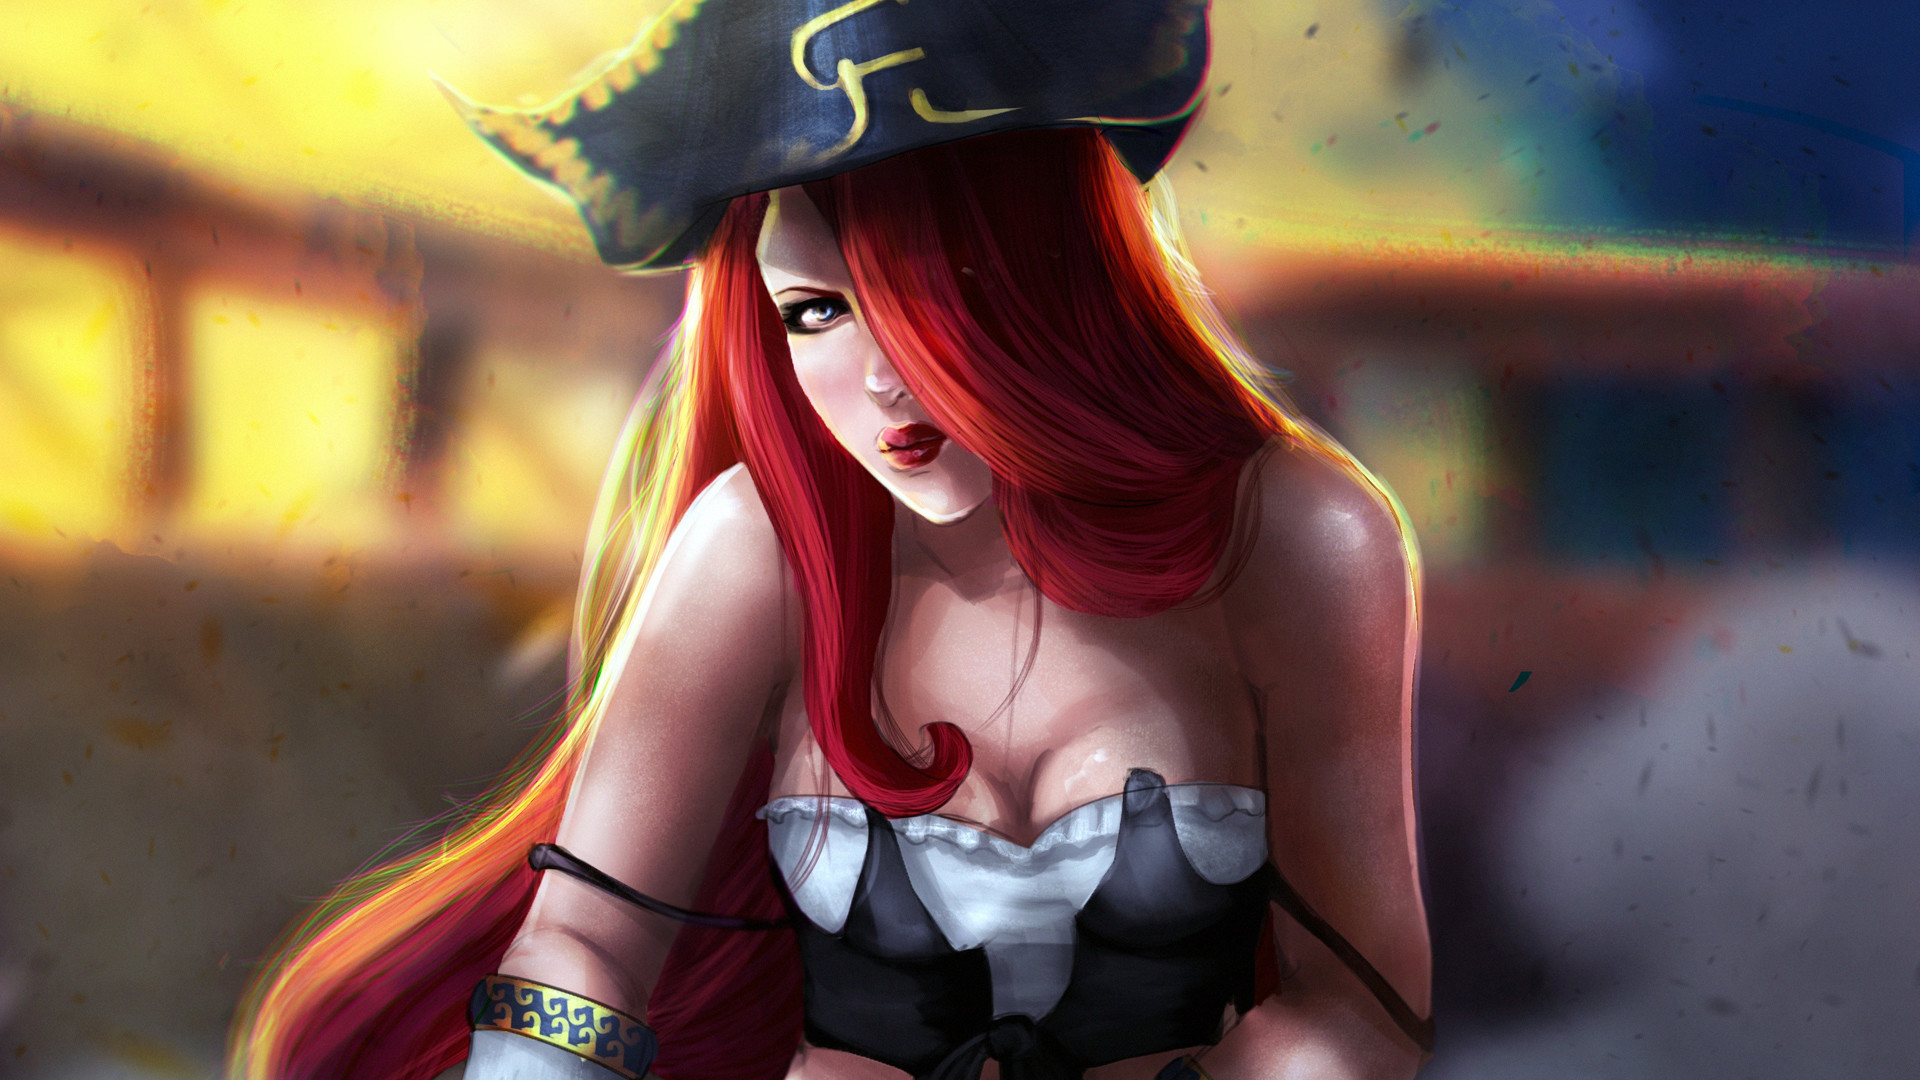 1920x1080 miss fortune league of legends game